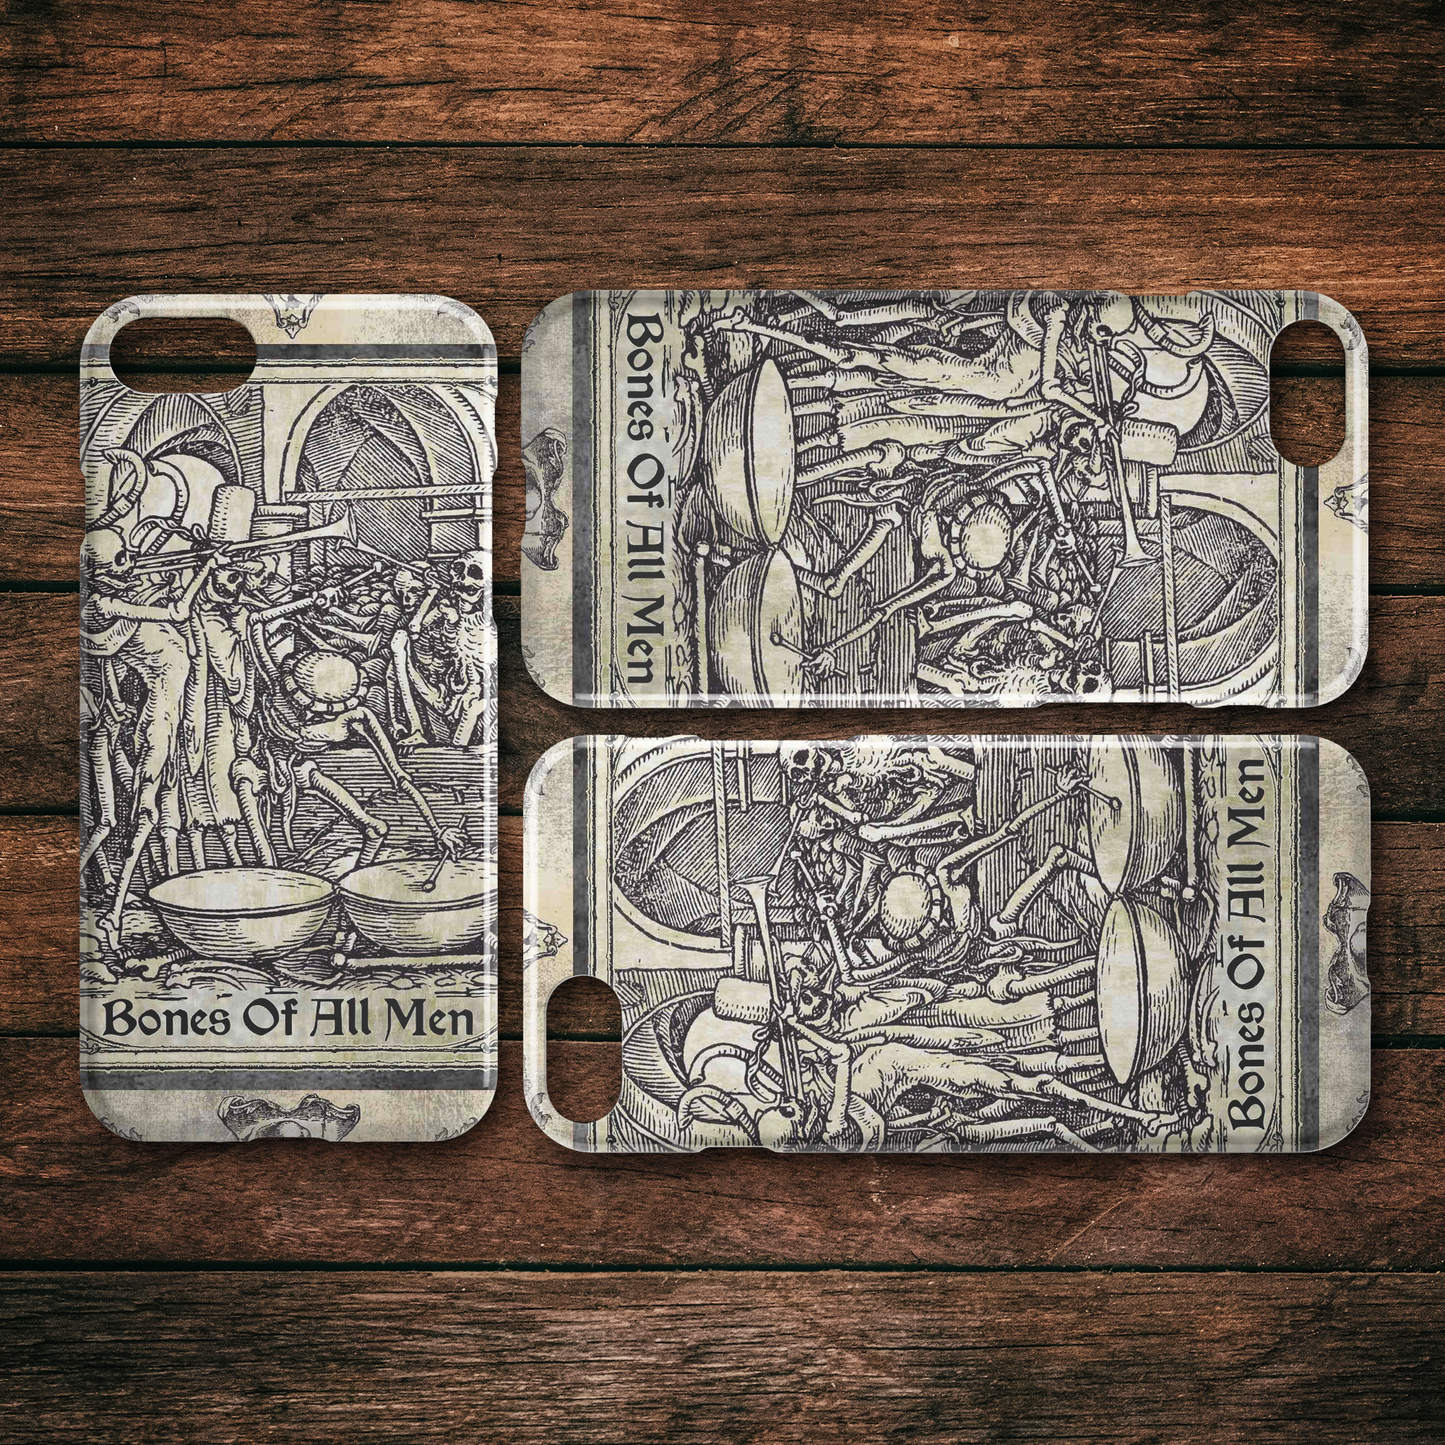 The Bones Of All Men - Hans Holbein iPhone Case